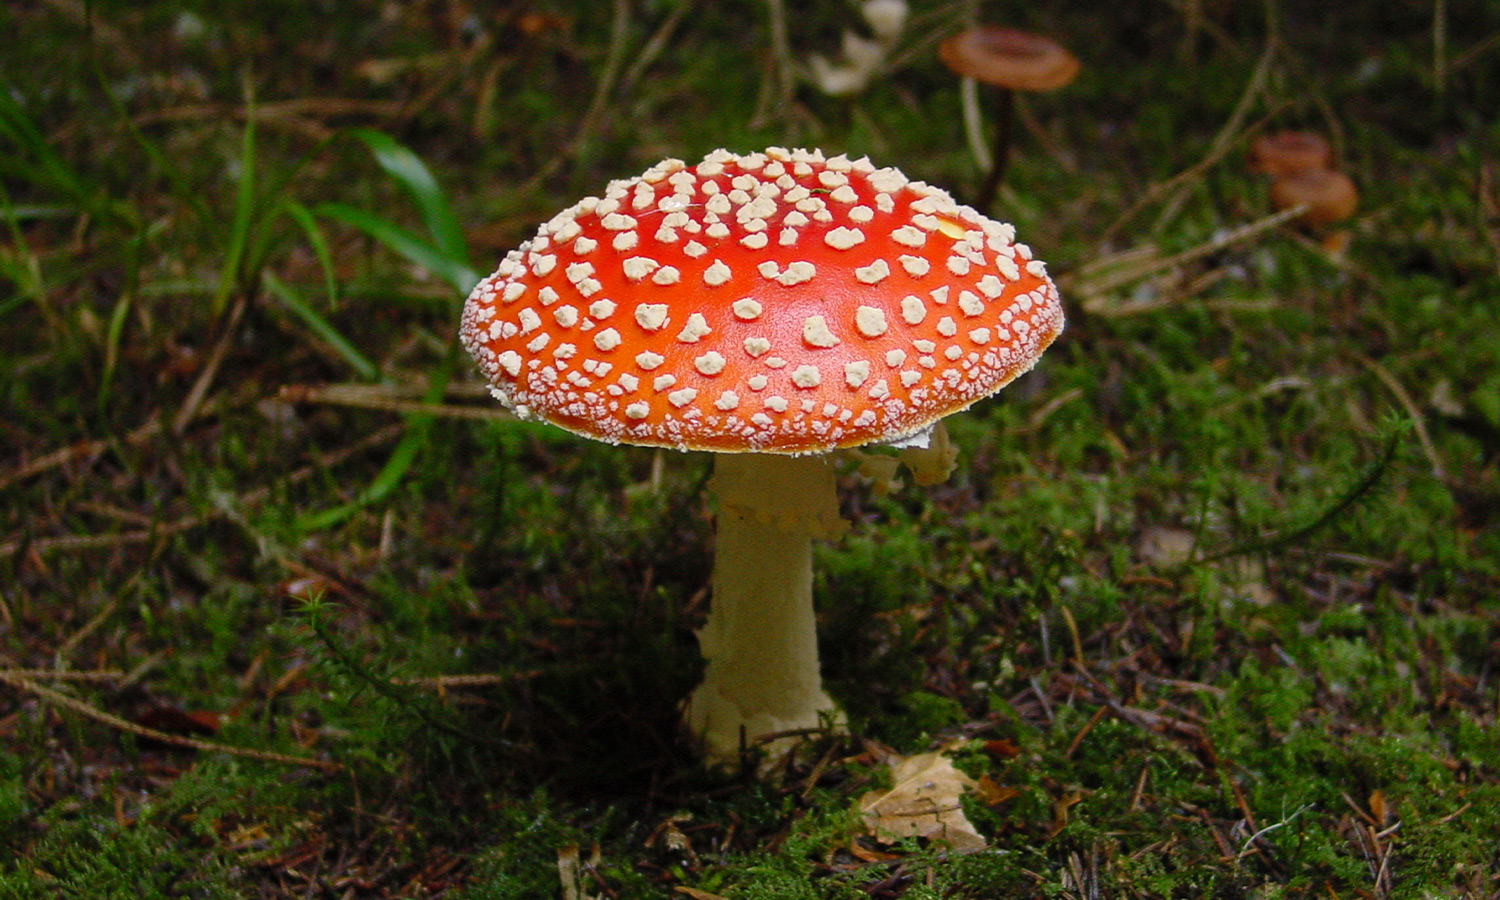 Toadstools or Amanita muscaria mushrooms. Not great for foraging.